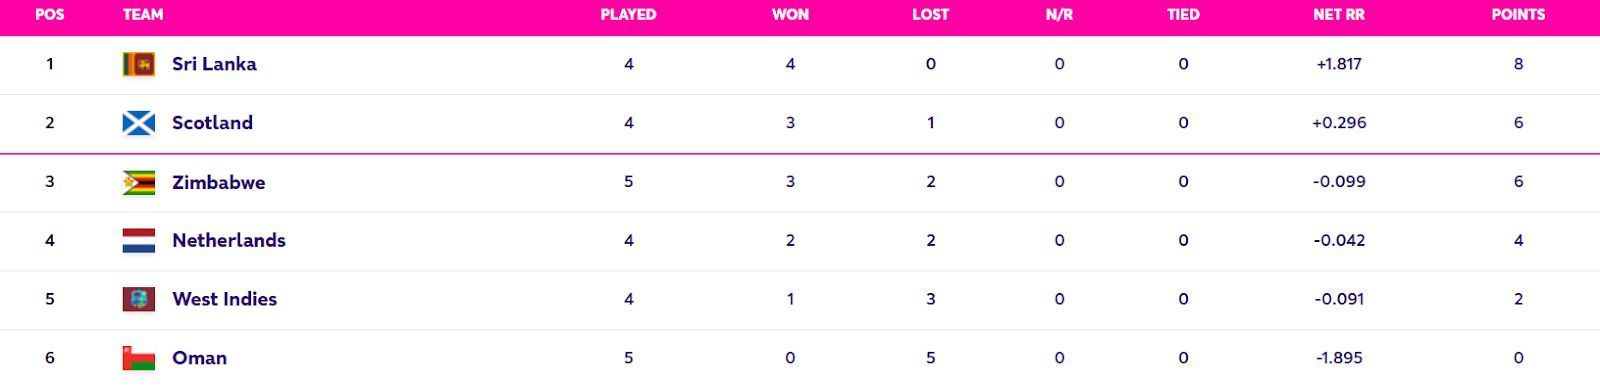 Updated Points Table of Super Six